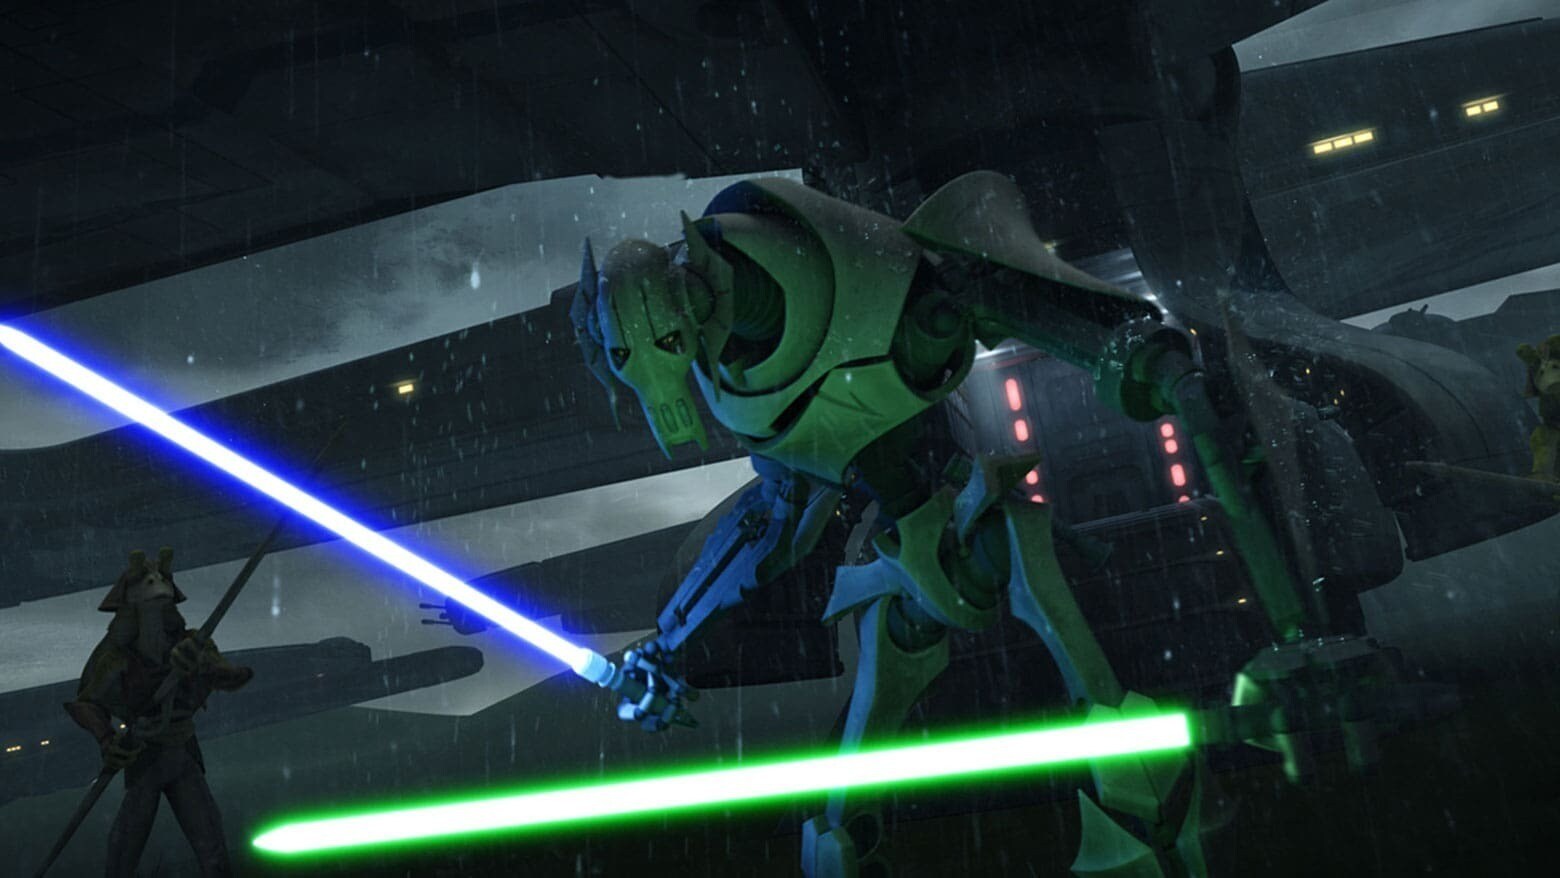 Jar Jar Binks and General Grievous holding one purple and one green lightsaber in The Clone Wars